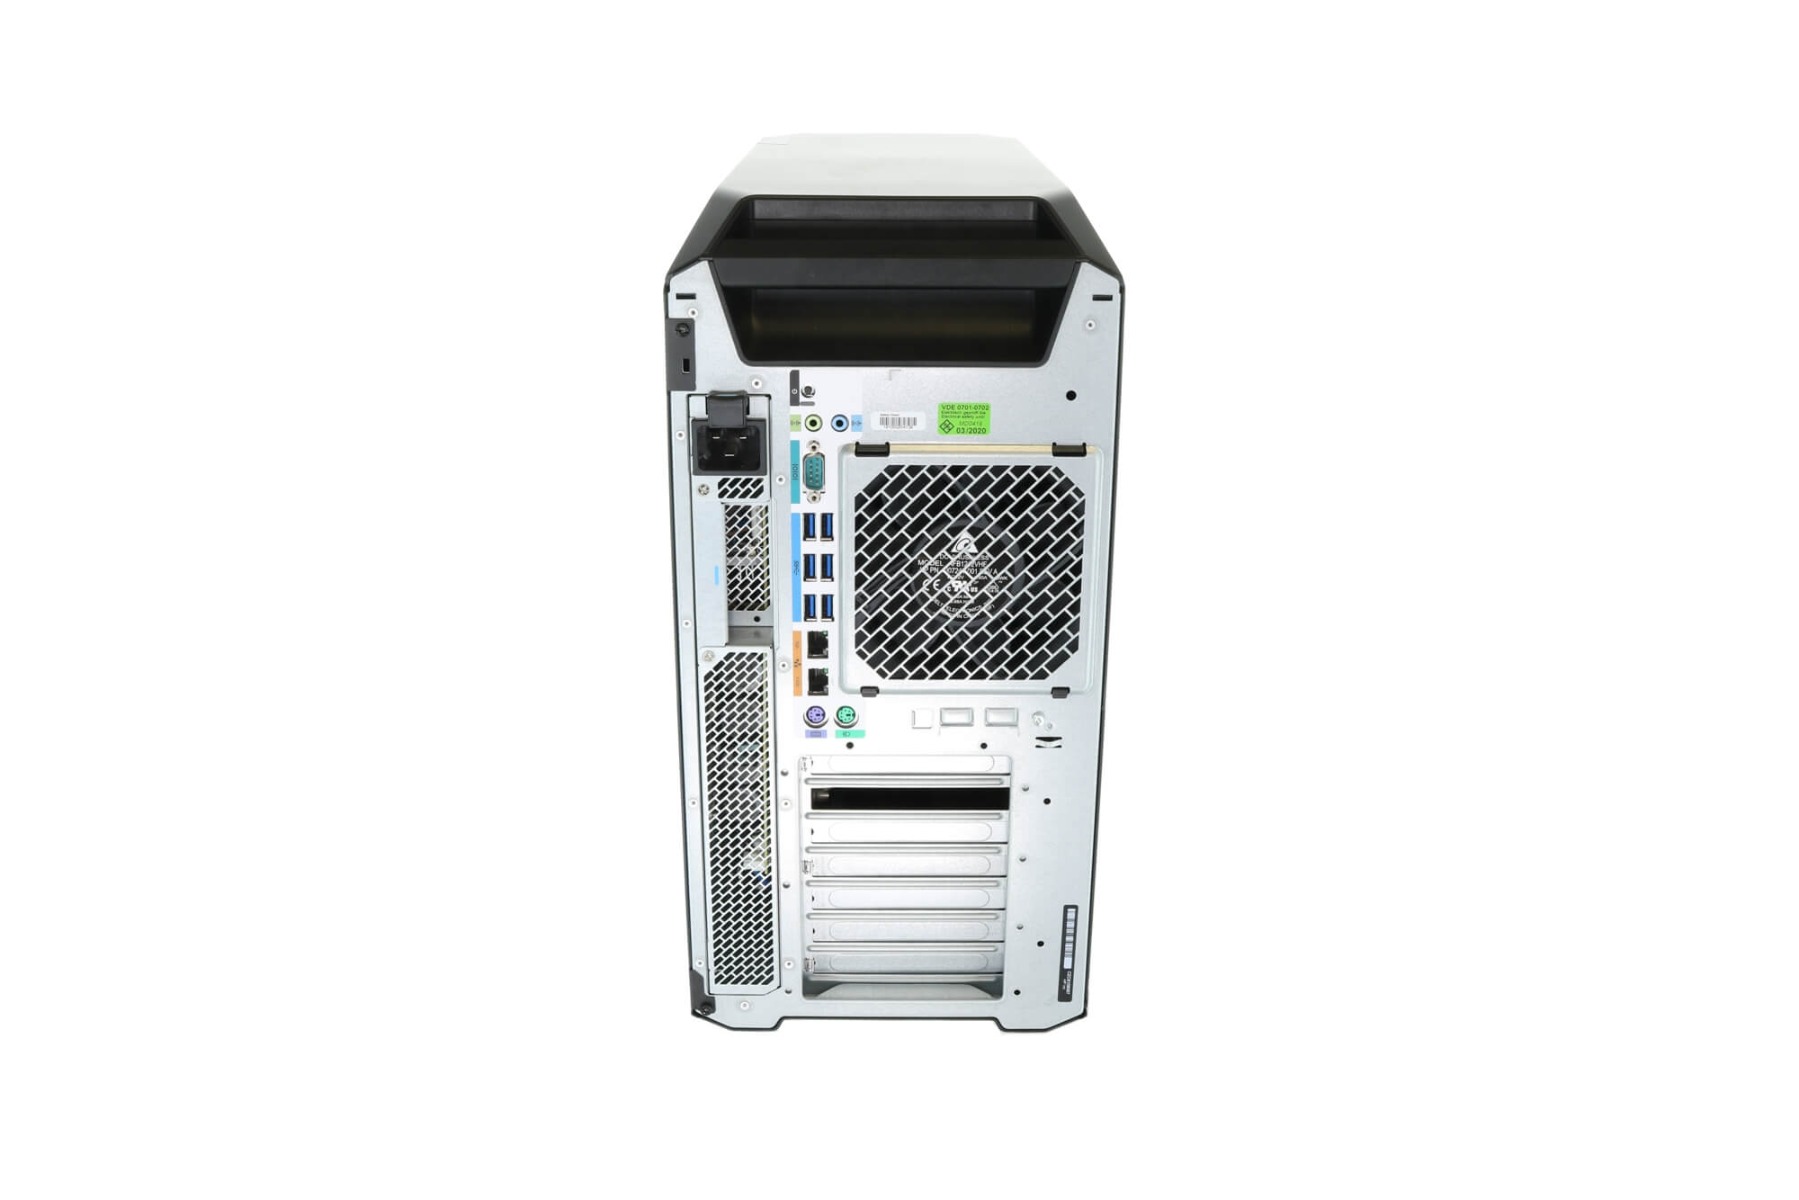 HP Z8 G4 Tower Workstation - Configure Your Own